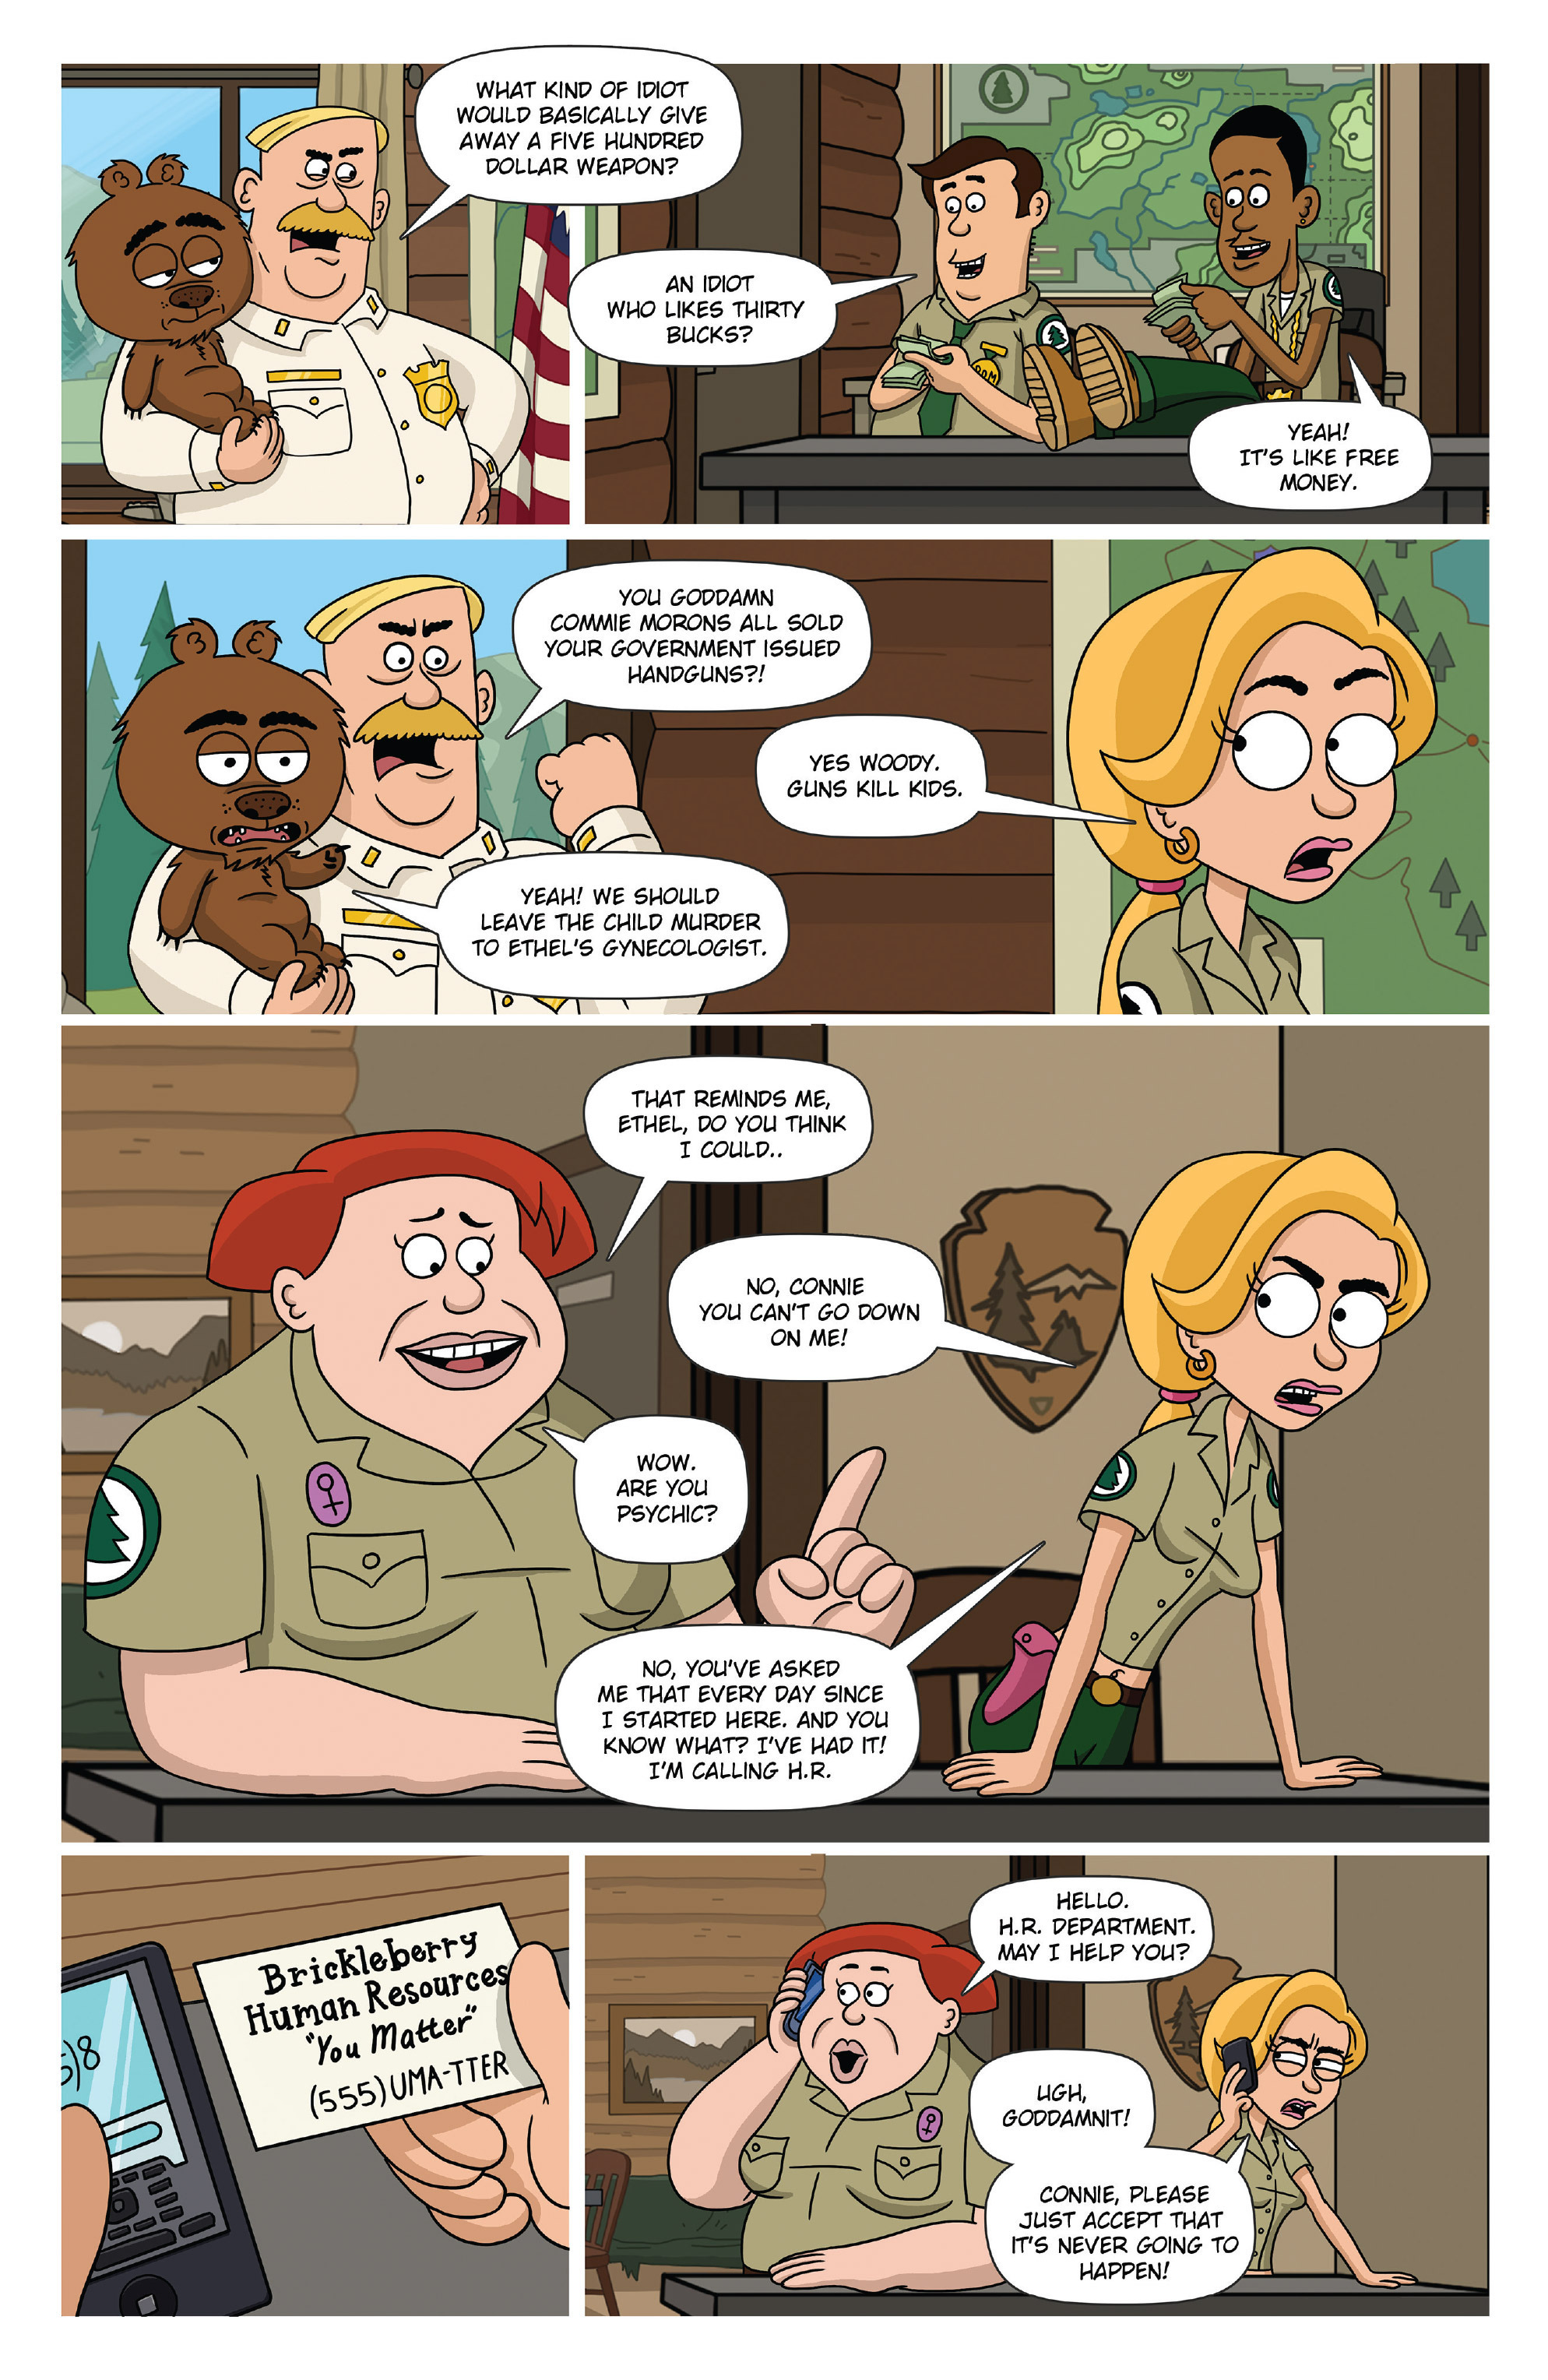 Brickleberry Issue 1 | Read Brickleberry Issue 1 comic online in high  quality. Read Full Comic online for free - Read comics online in high  quality .| READ COMIC ONLINE